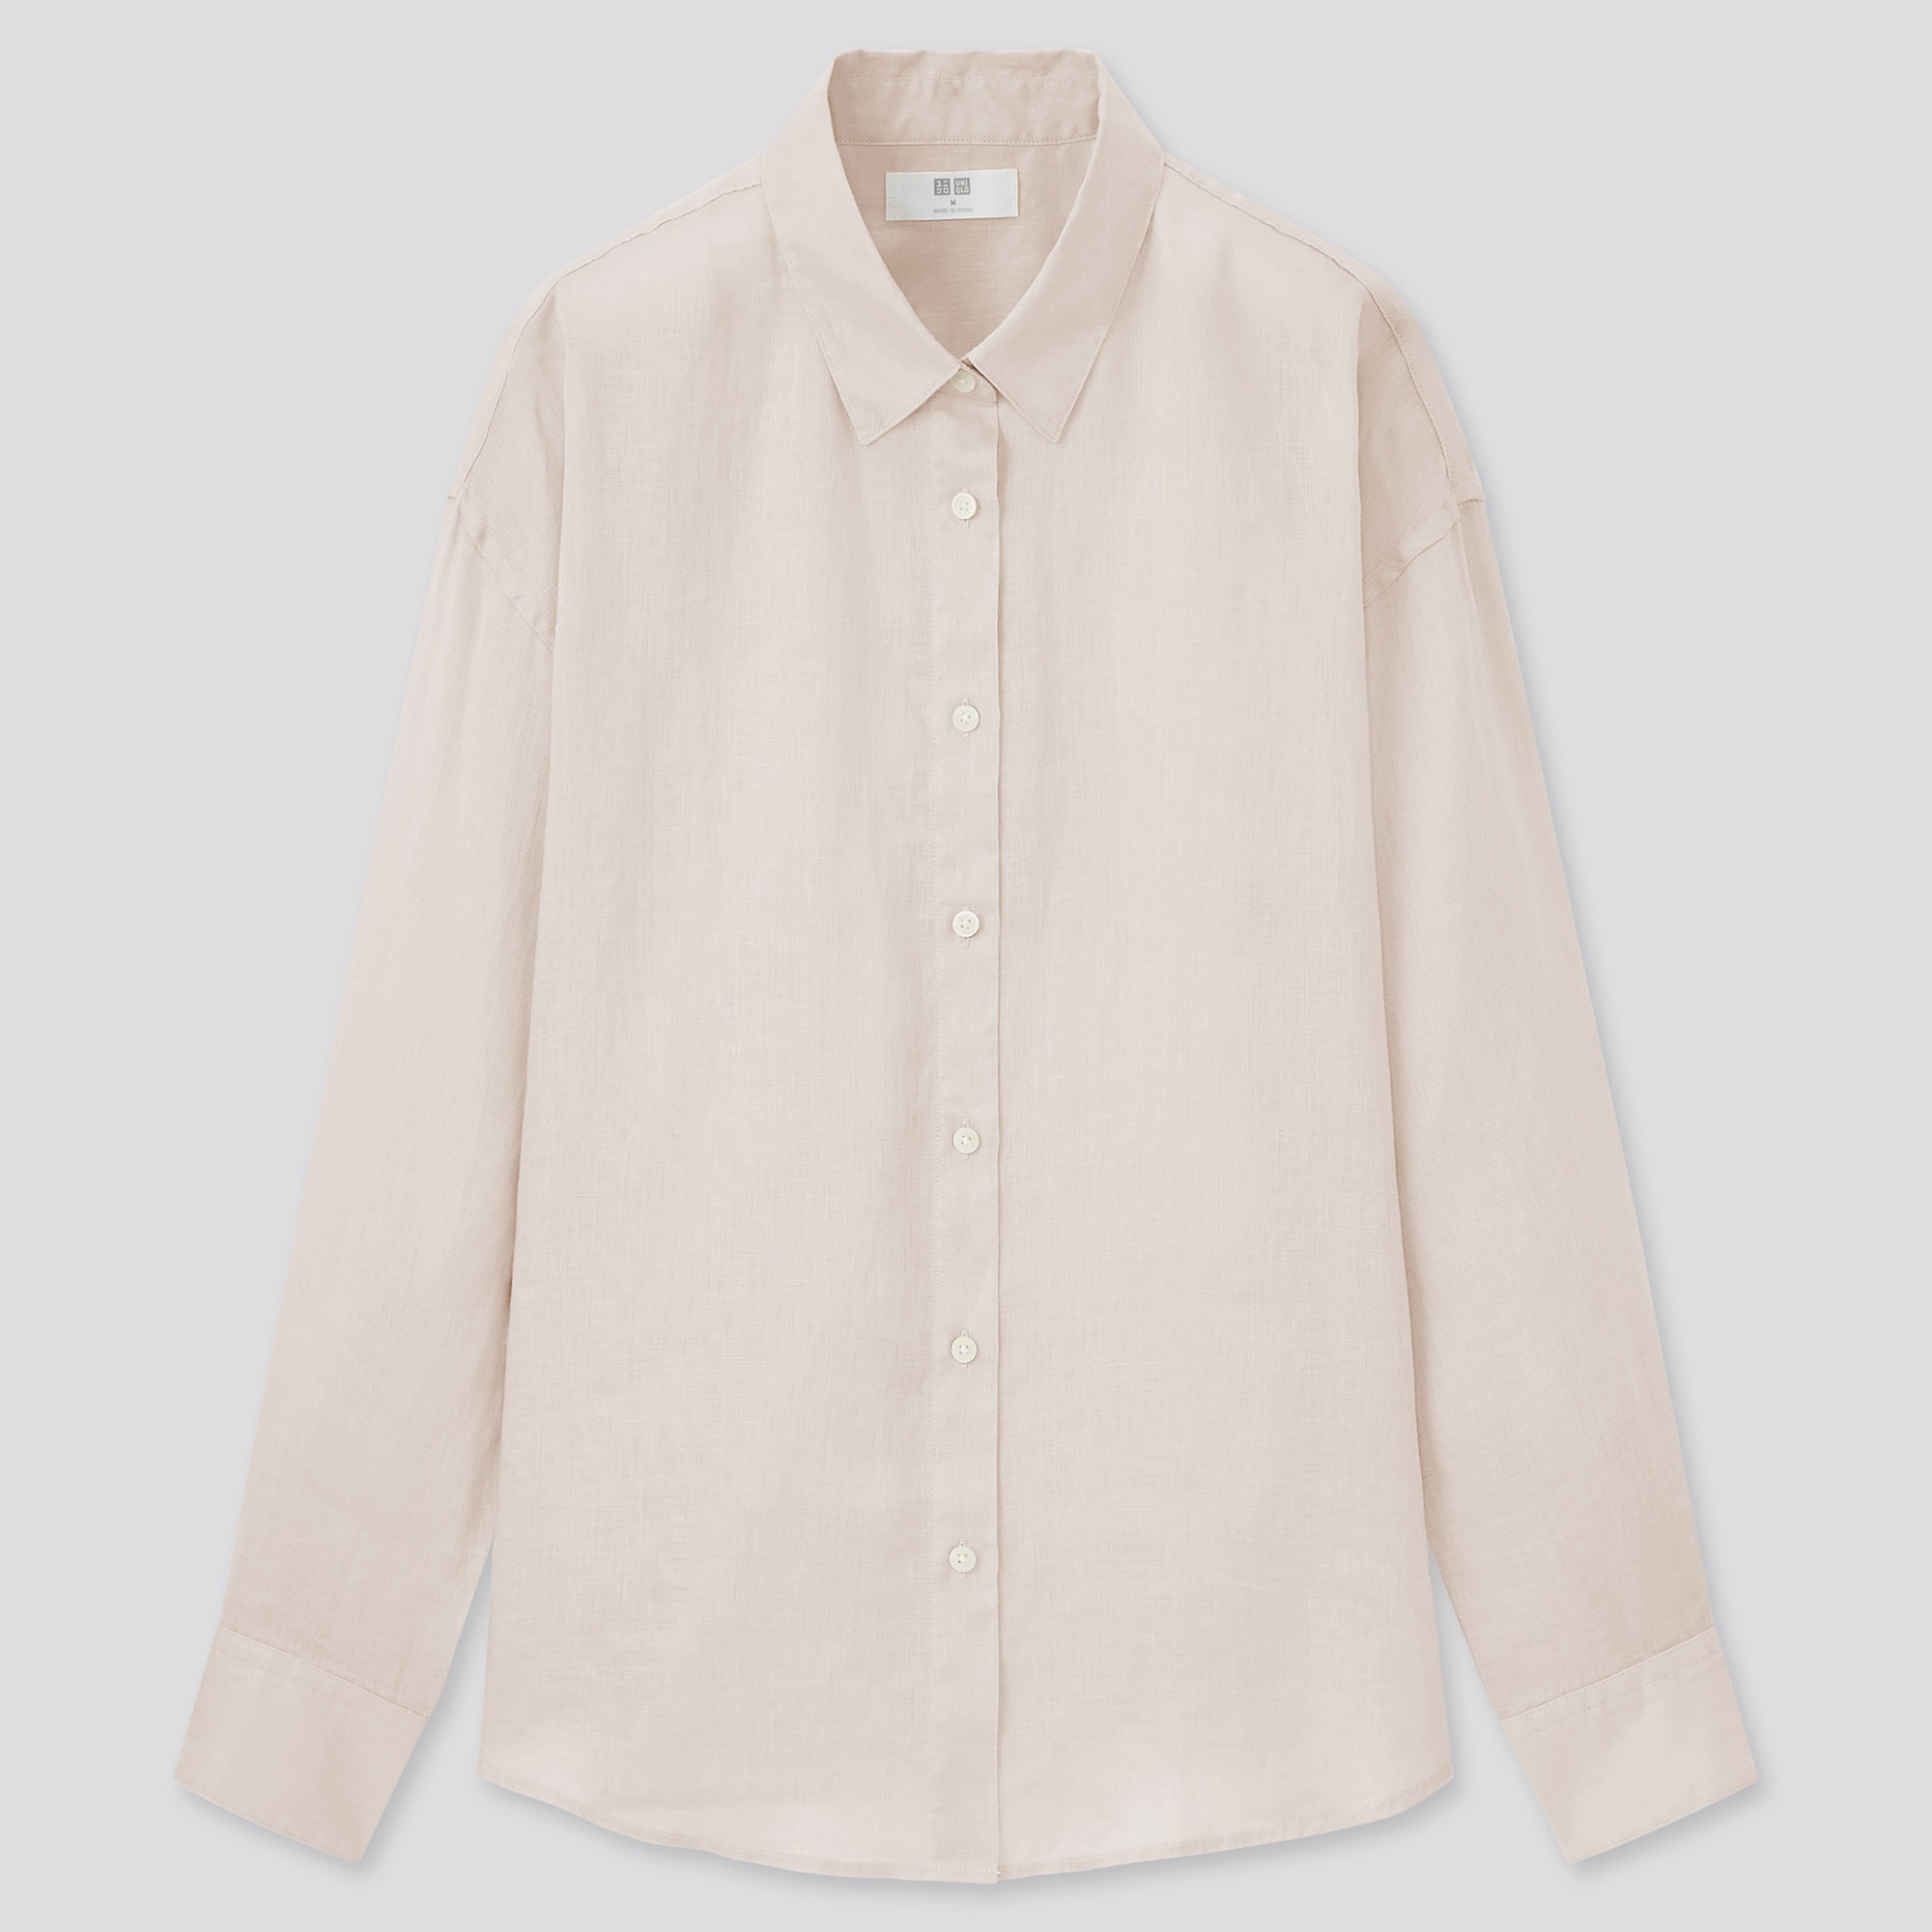 Check styling ideas for「Premium Linen Long-Sleeve Shirt、AIRism Cotton ...